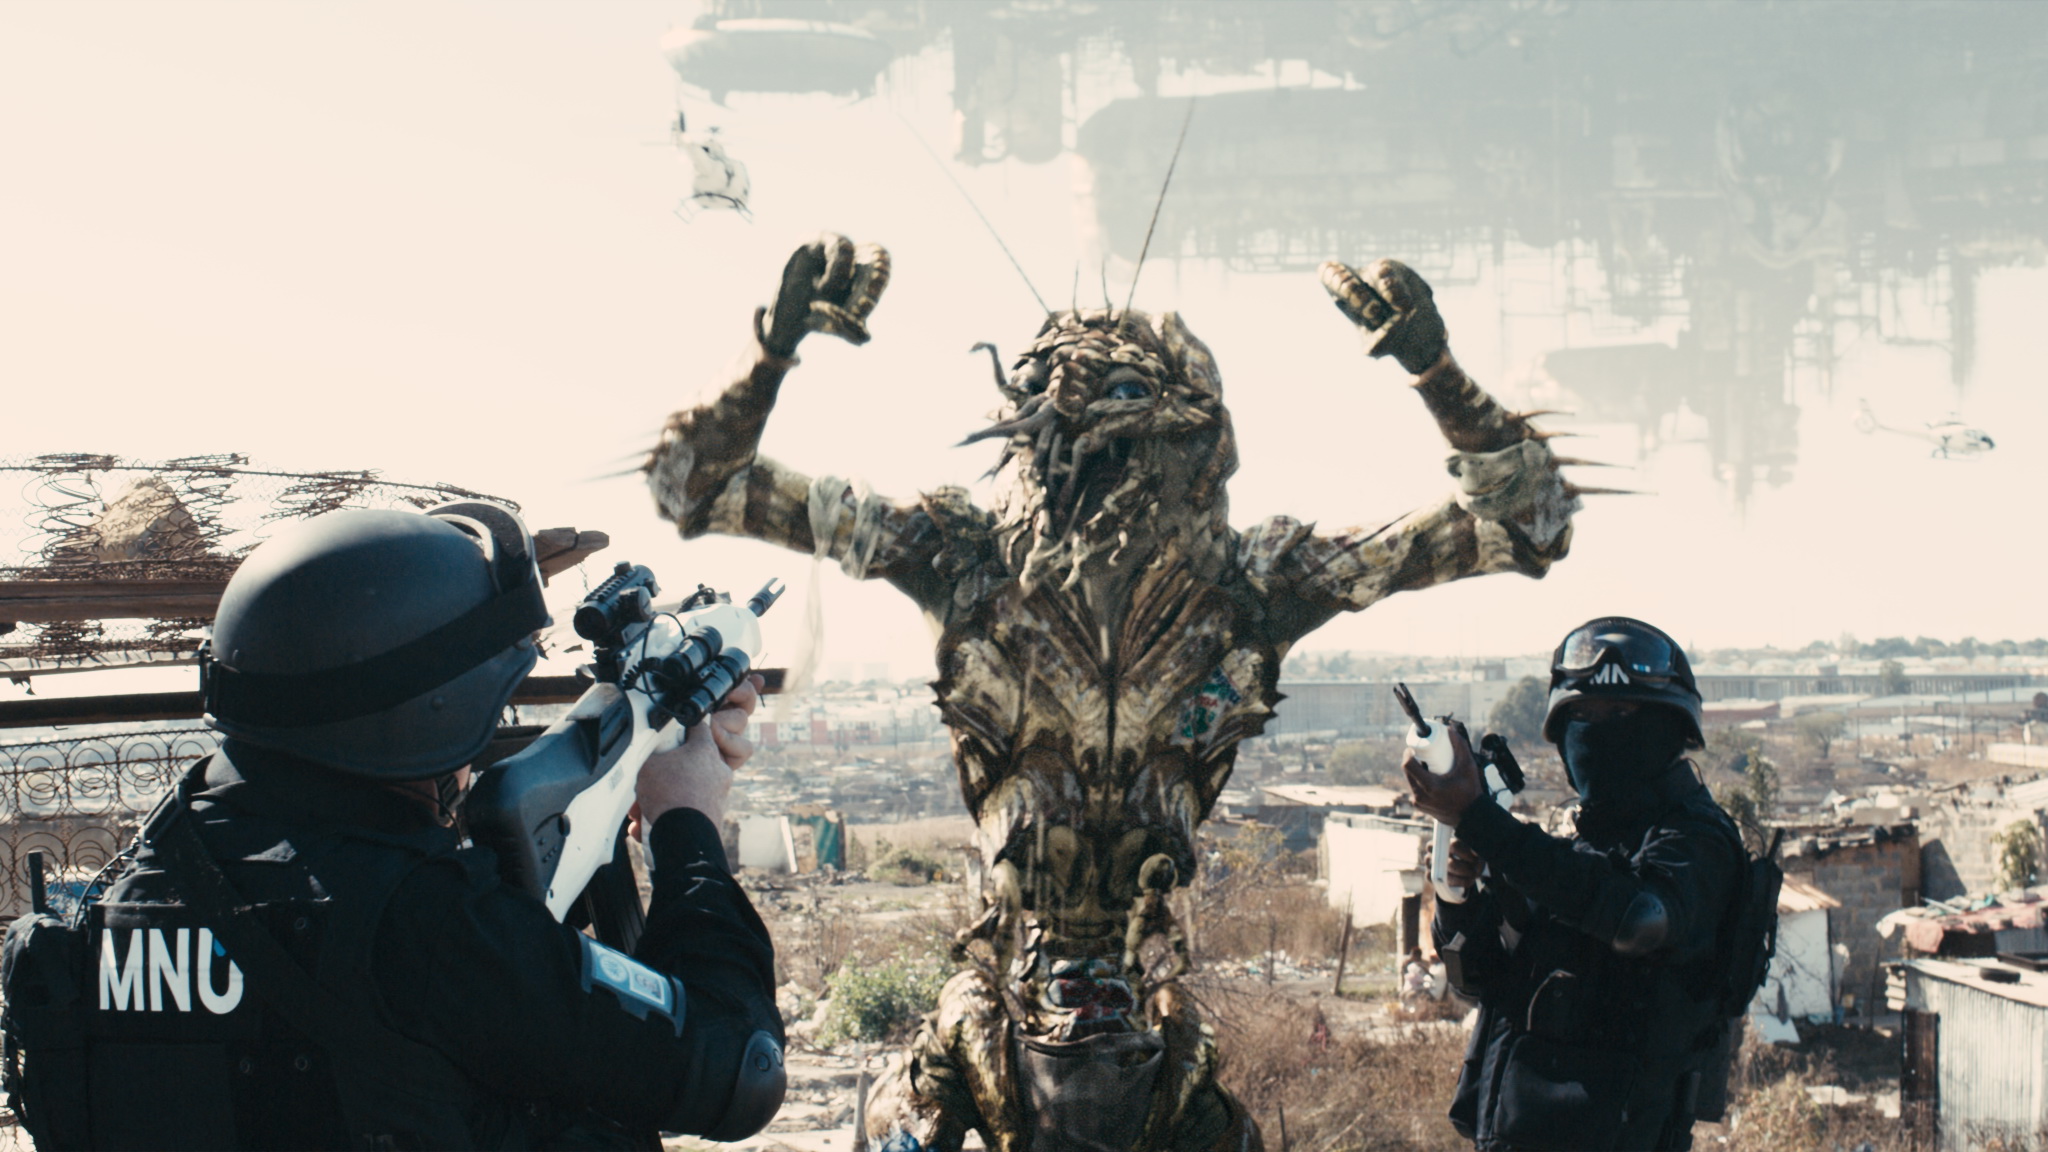 District 9 is not an apartheid allegory. It's about current sentiment toward immigrants. The film is based on the Neill Blomkamp short "Alive" (2005), for which Johannesburg residents were asked how they felt about immigrants from Zimbabwe and gave very hostile responses.